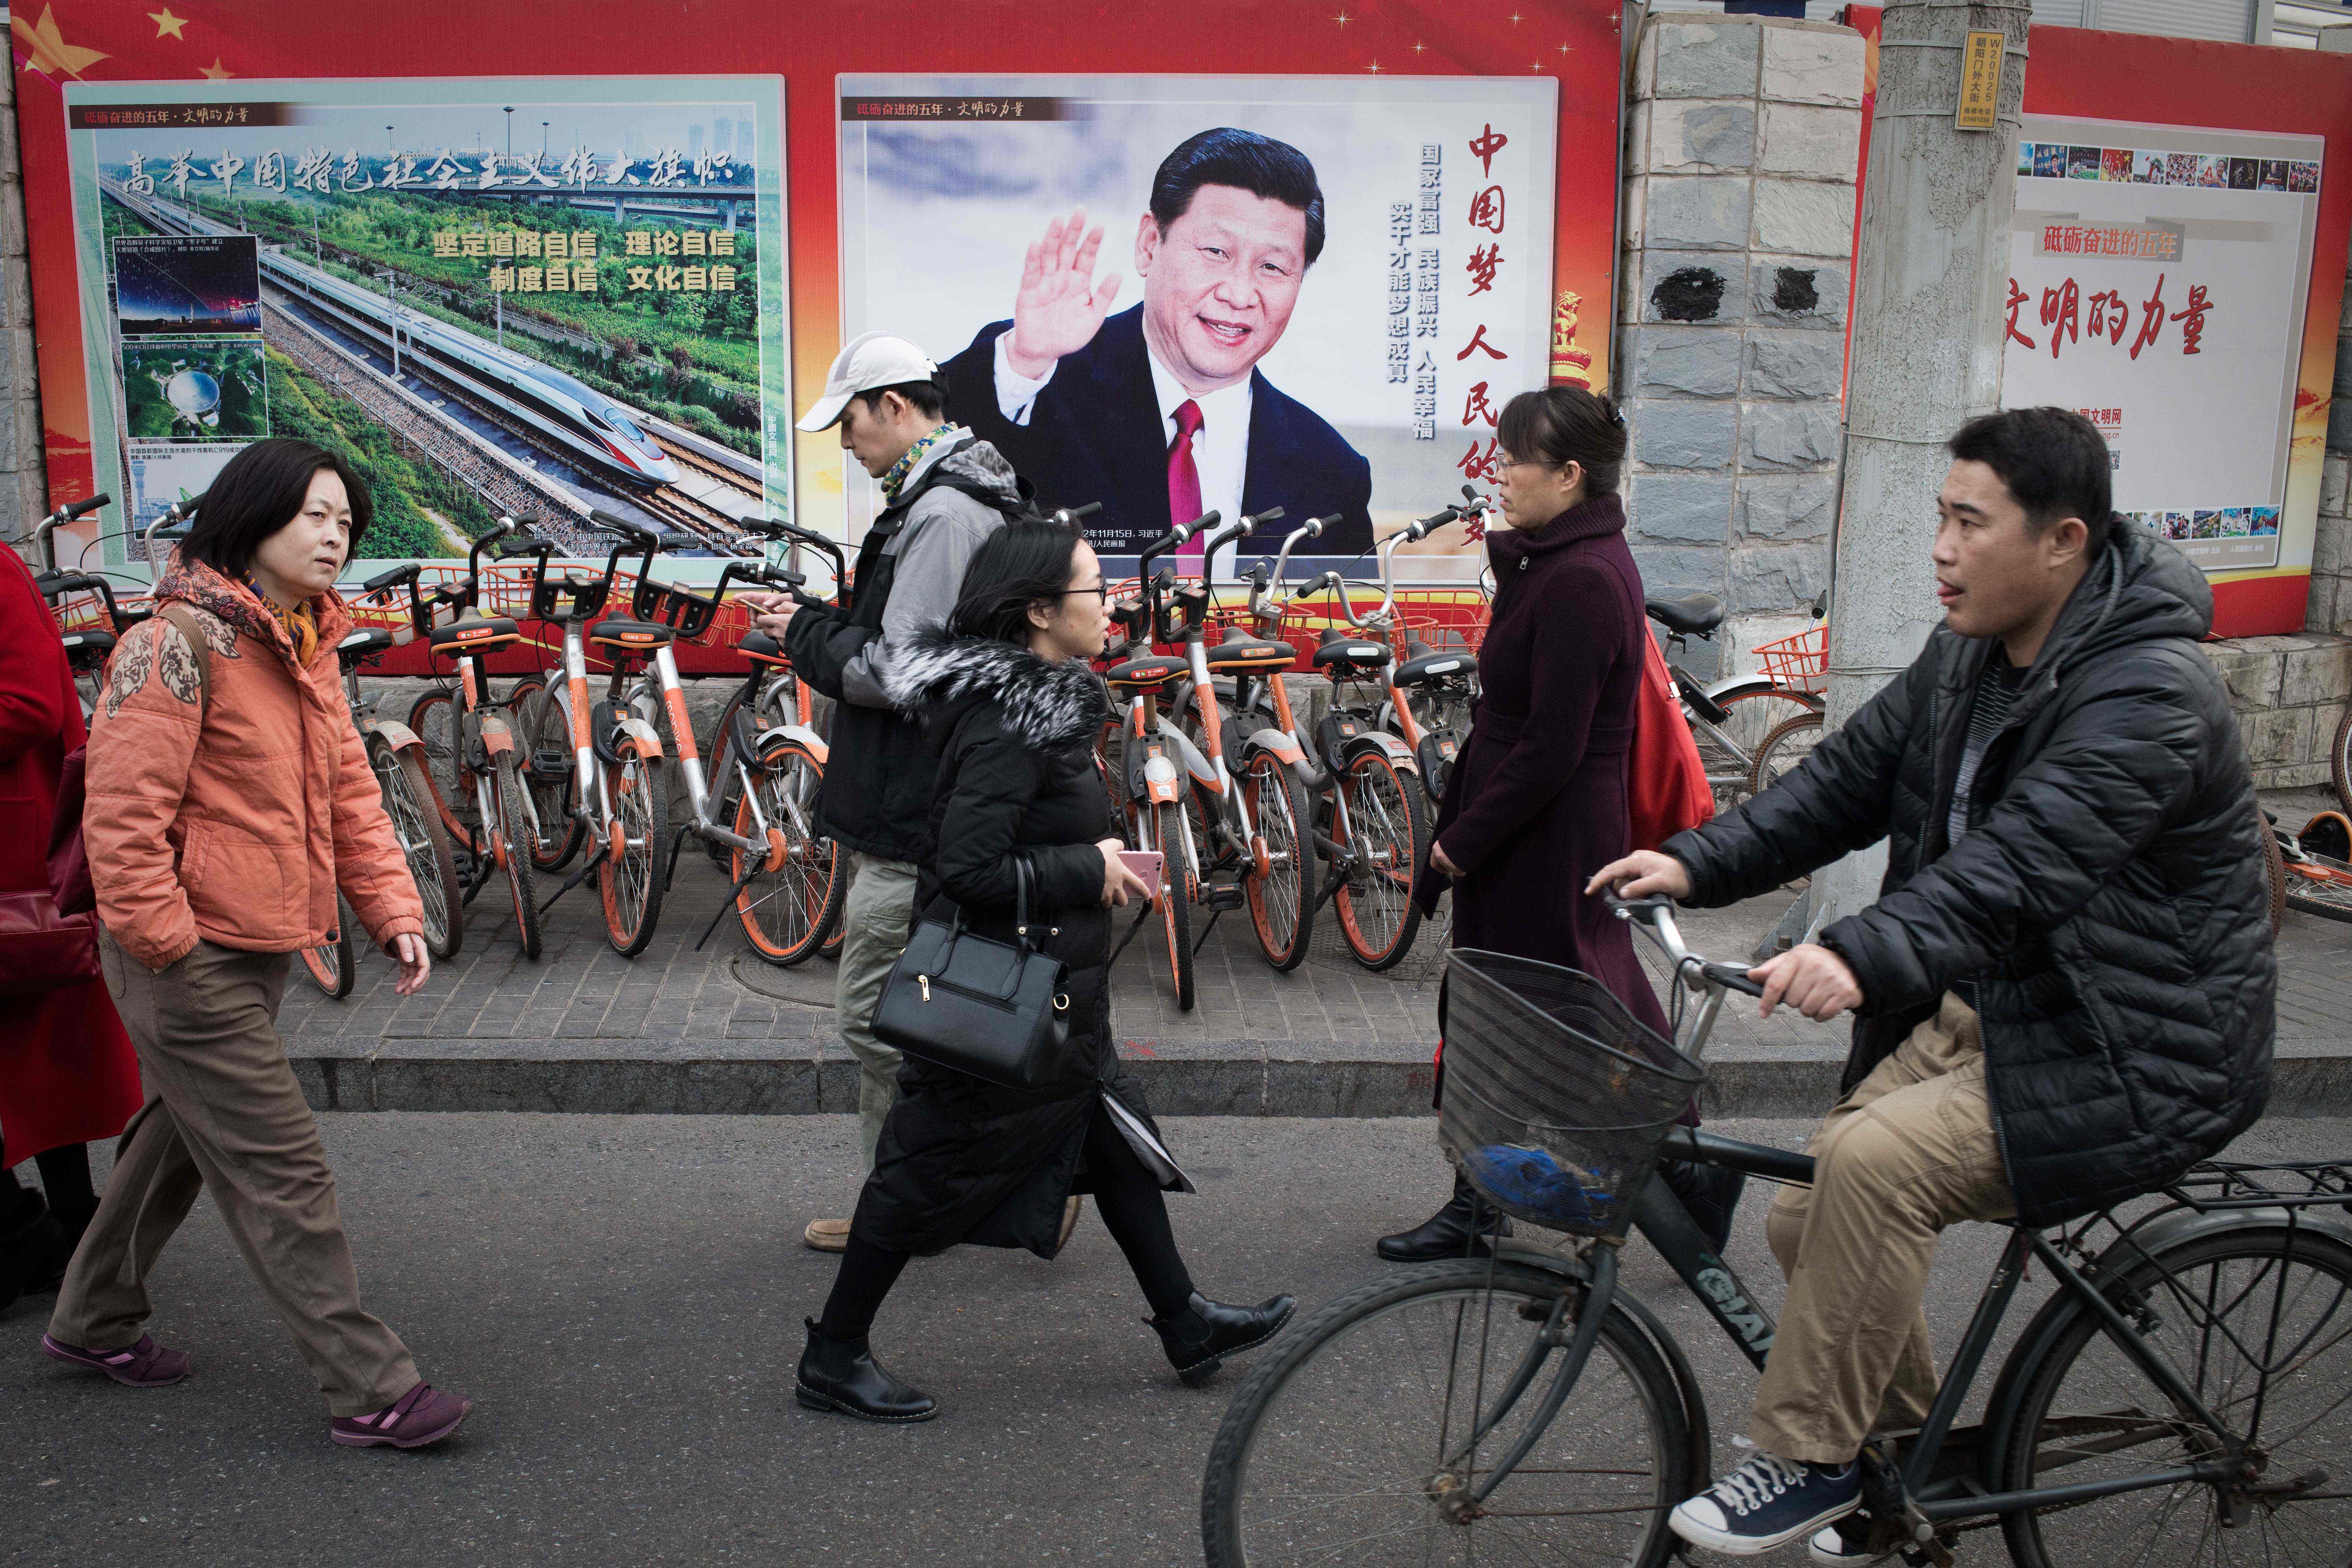 File: A propaganda poster showing China’s President Xi Jinping is pictured on a wall in Beijing